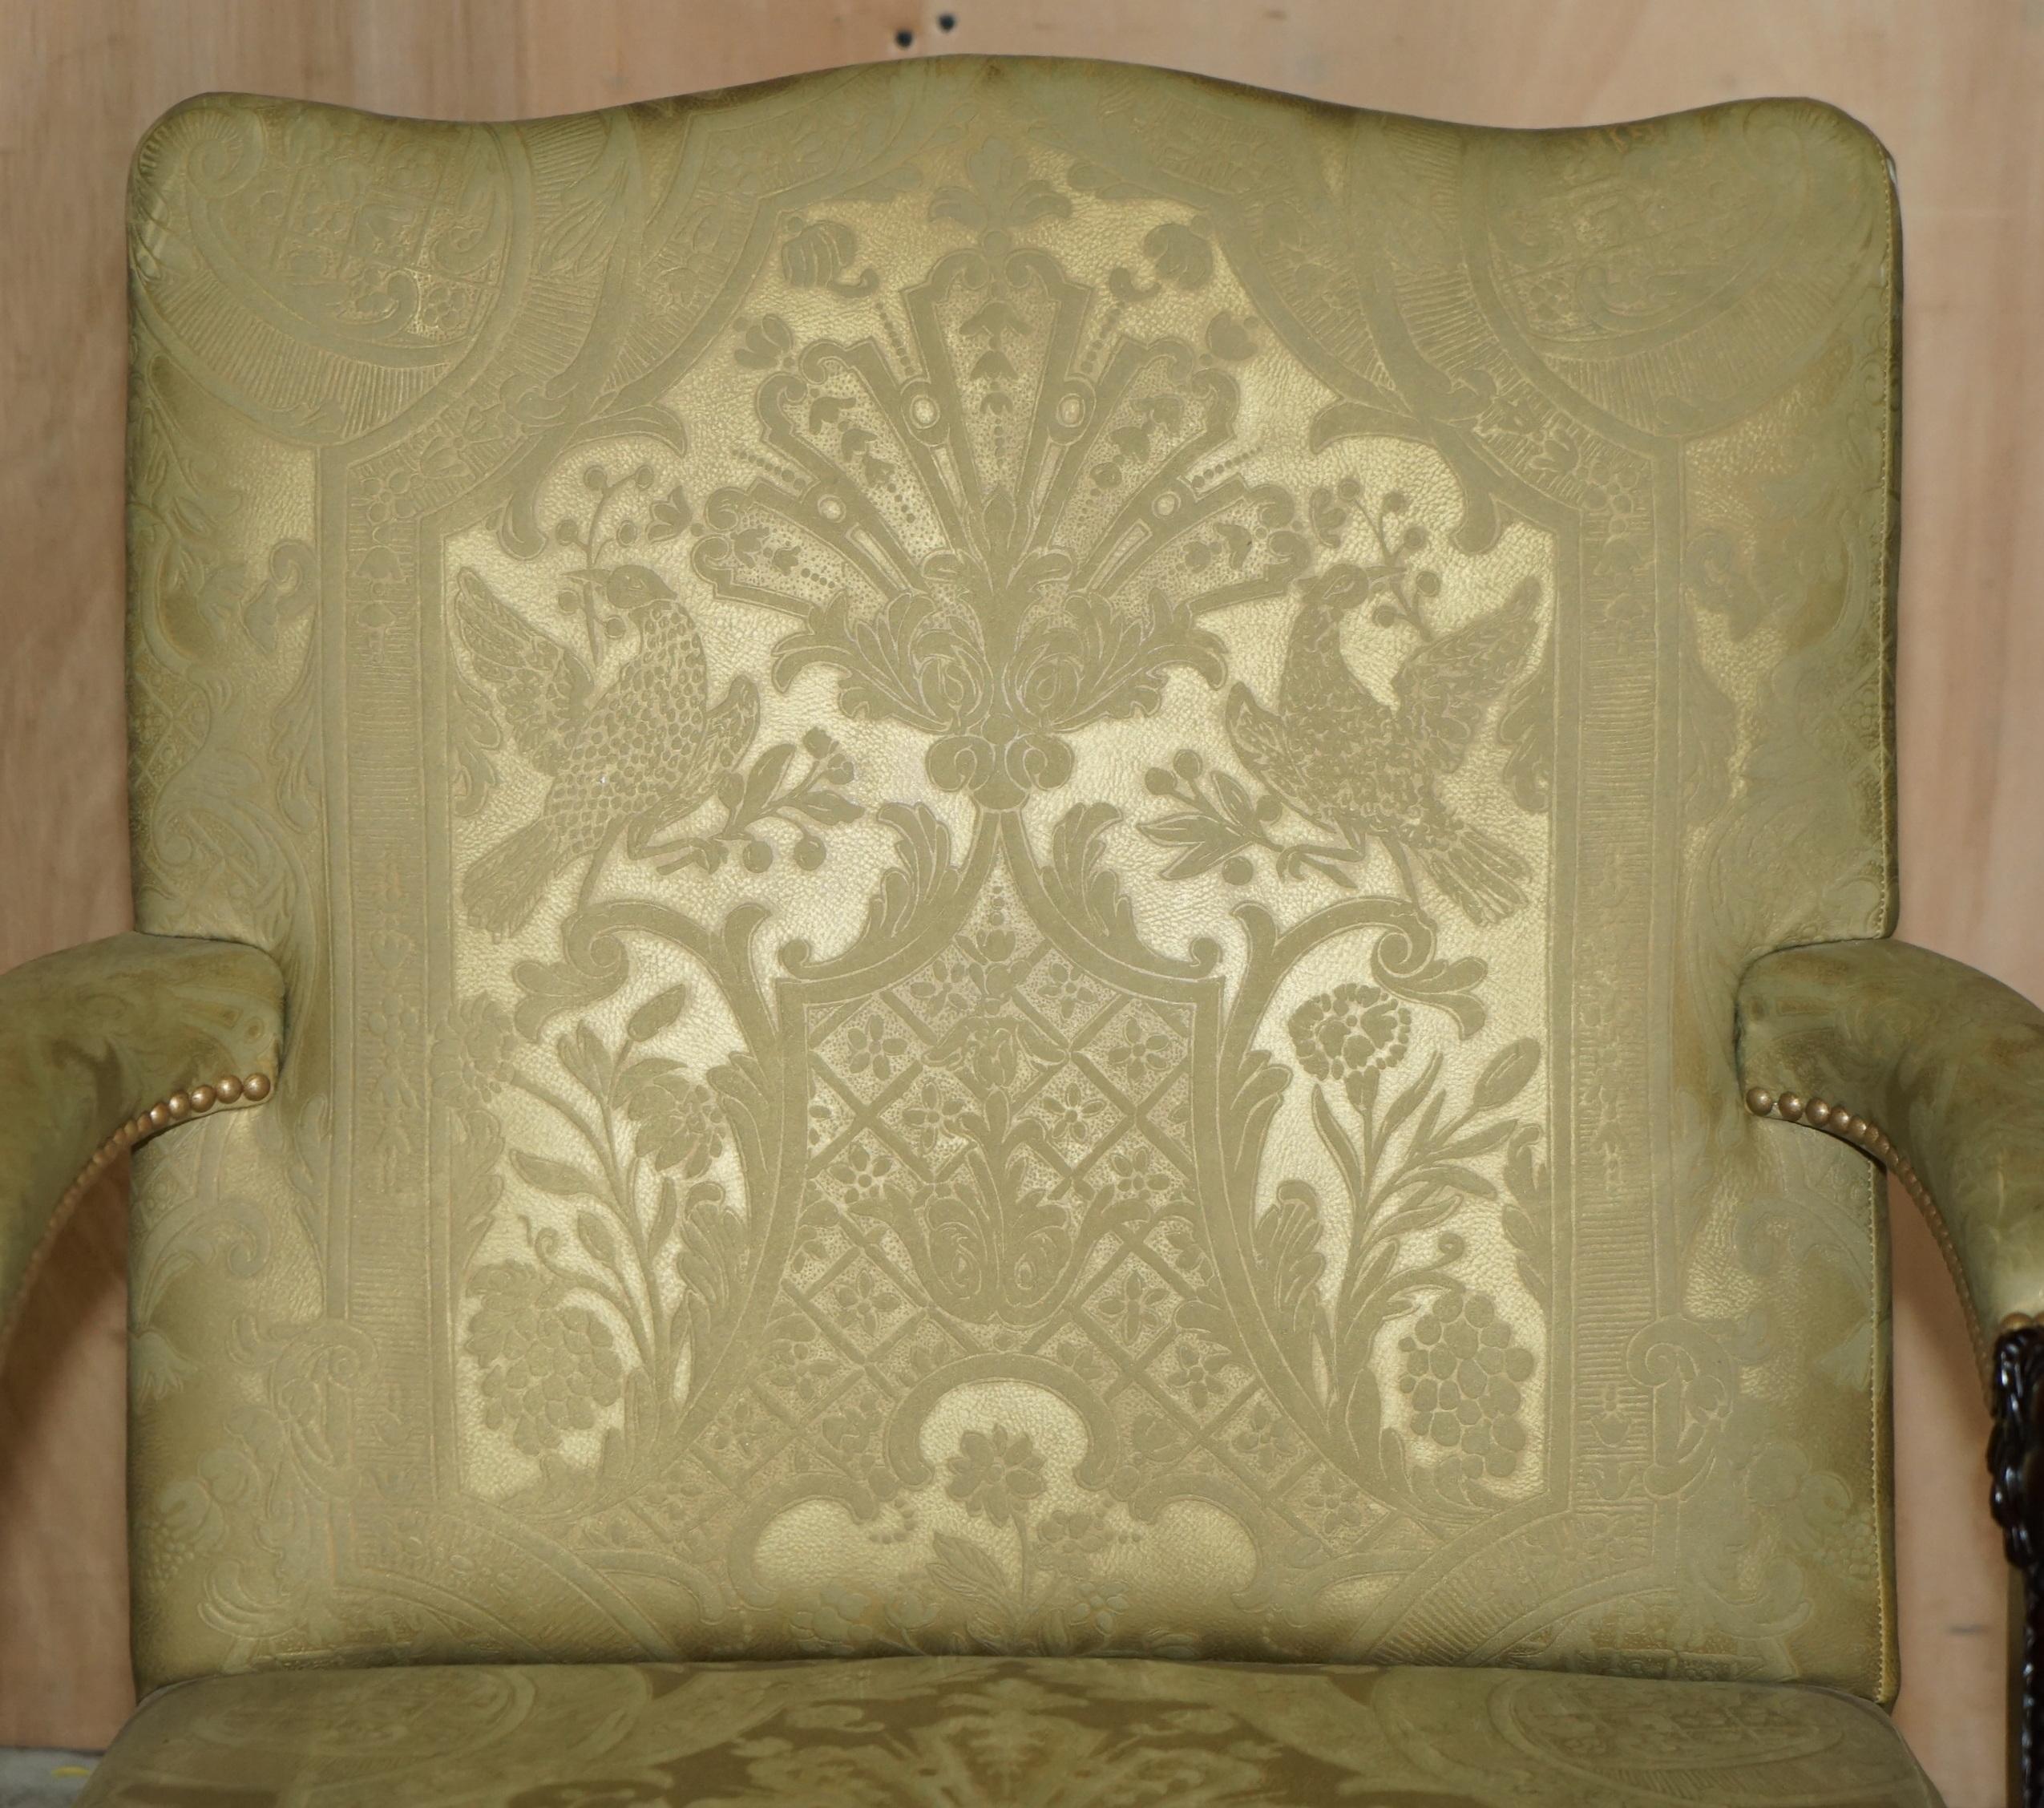 FINE PAiR OF LARGE CARved GAINSBOROUGH ARMCHAIRS AFTER GILES GRENDEY 1693-1780 im Angebot 2